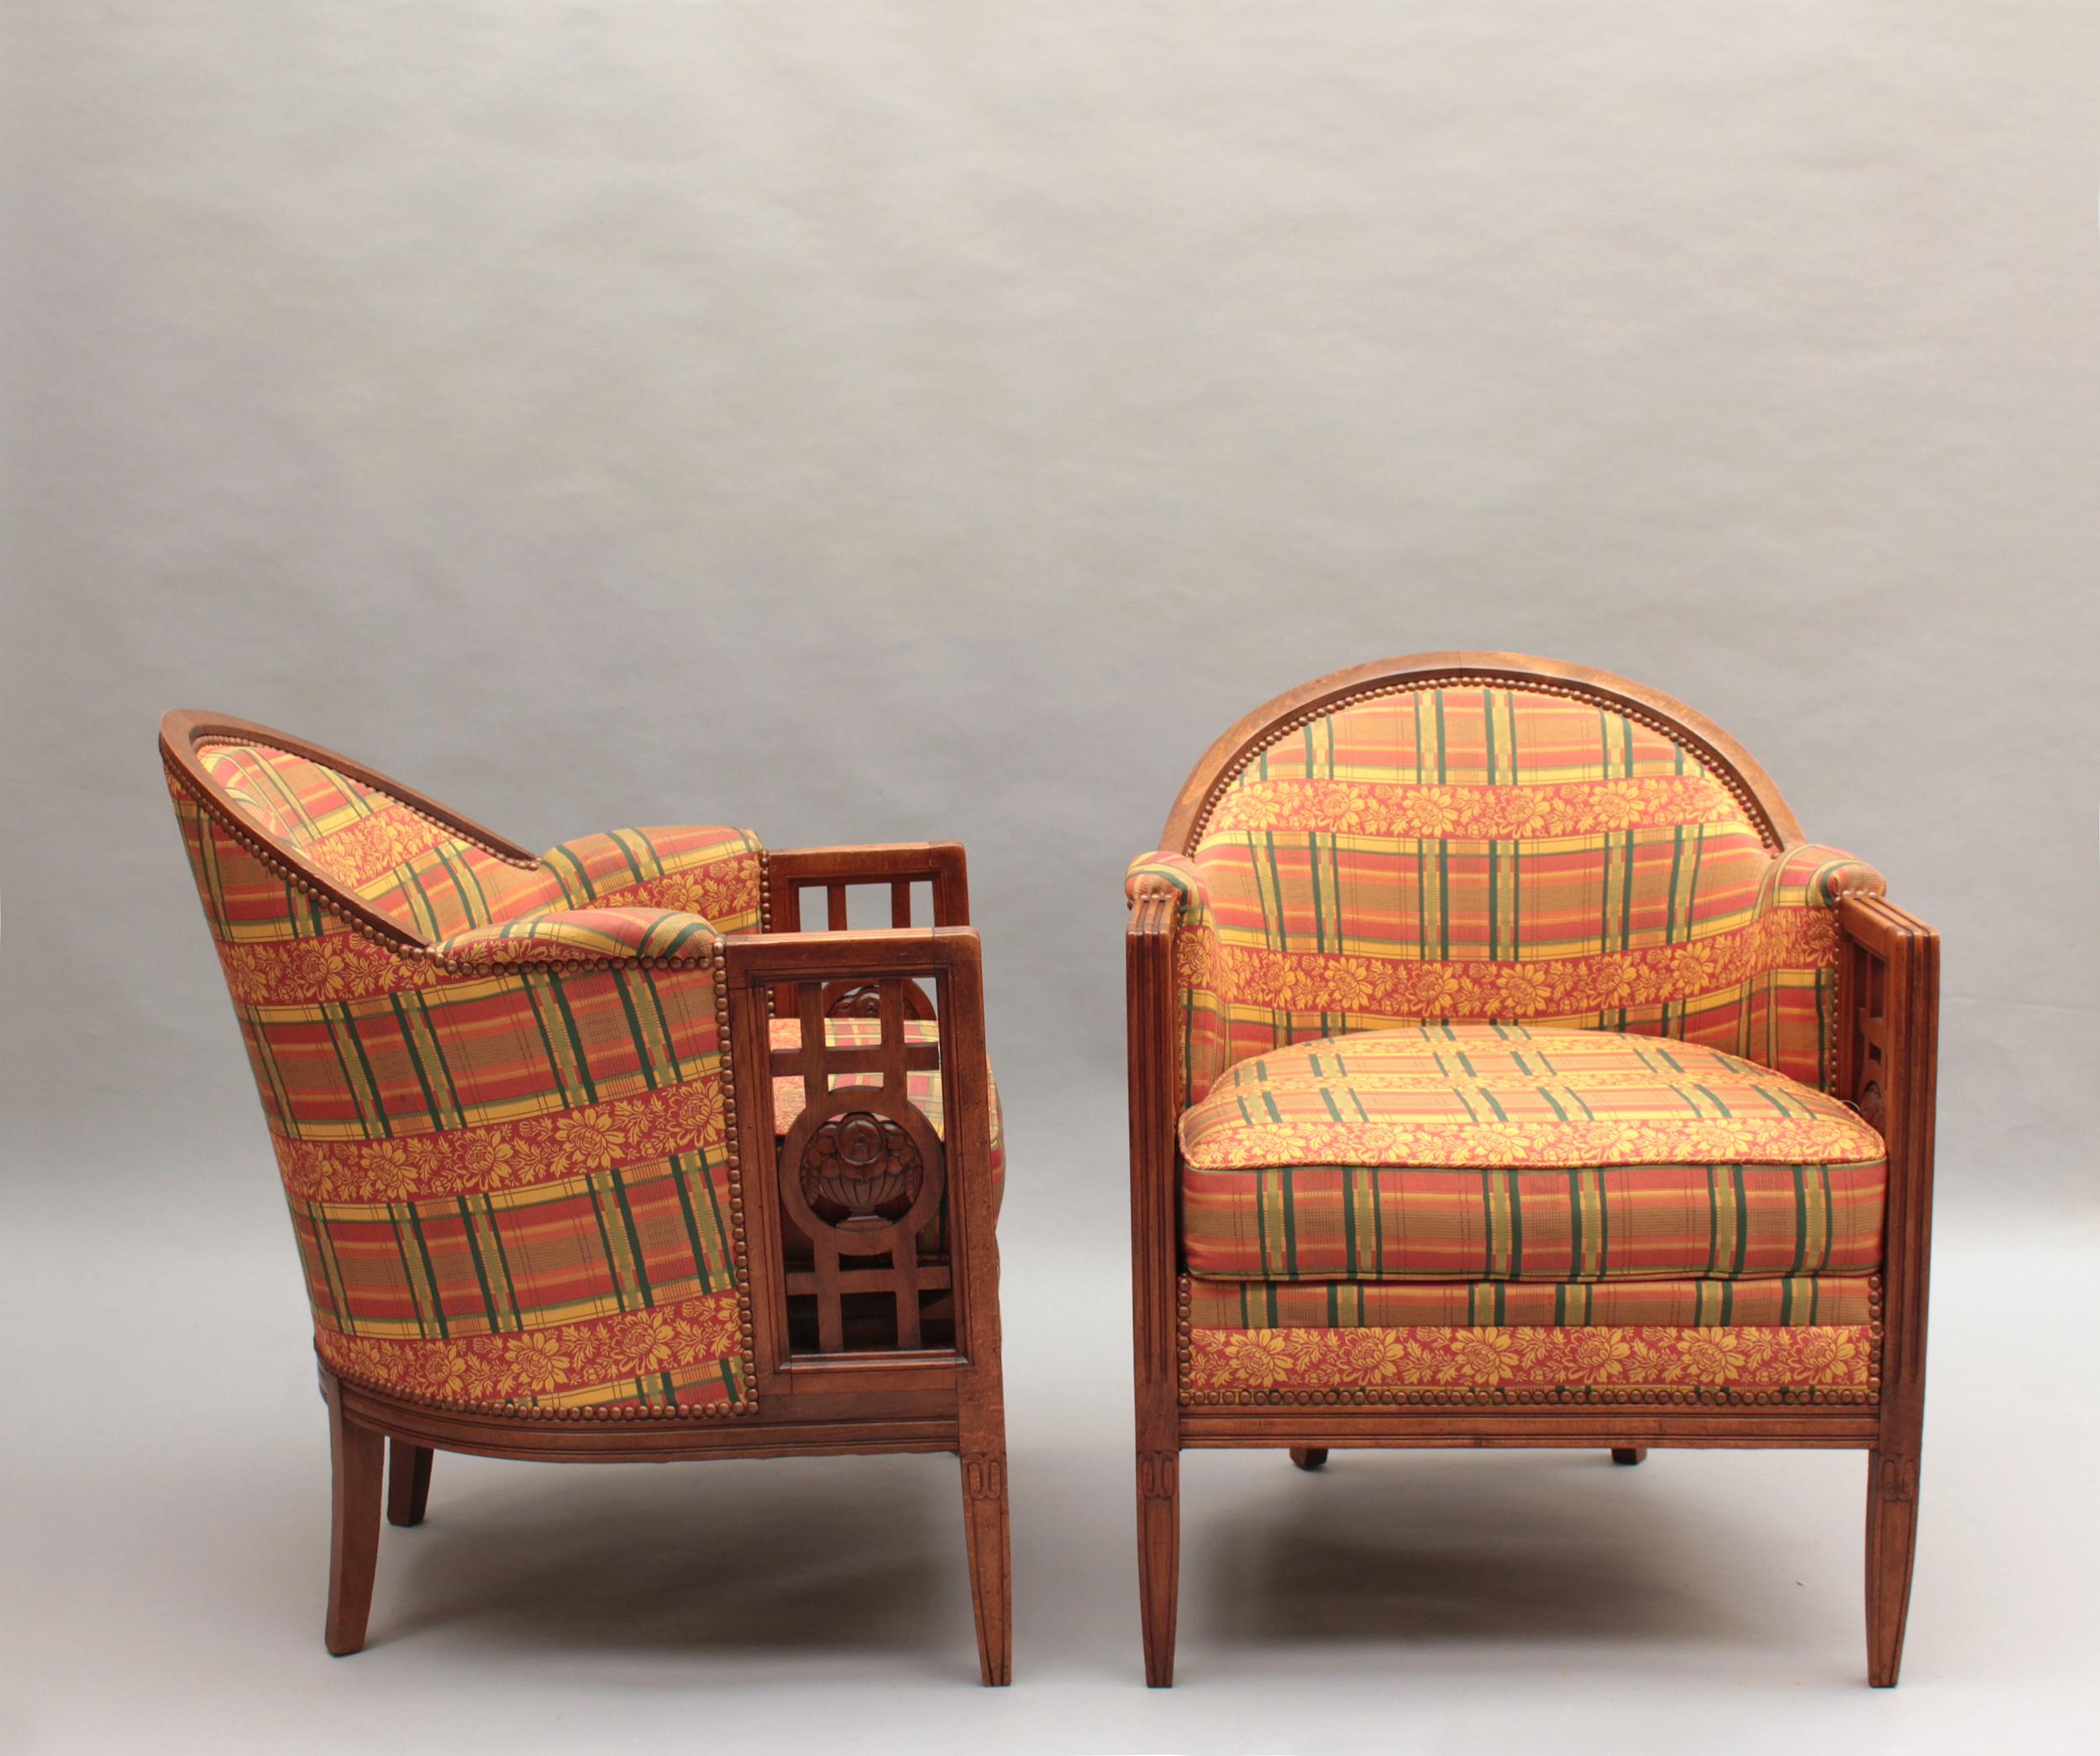 Paul Follot (1877 – 1941) - A pair of Fine French Art Deco beech framed armchairs with a floral carved openwork on each side.

Bibliography: 